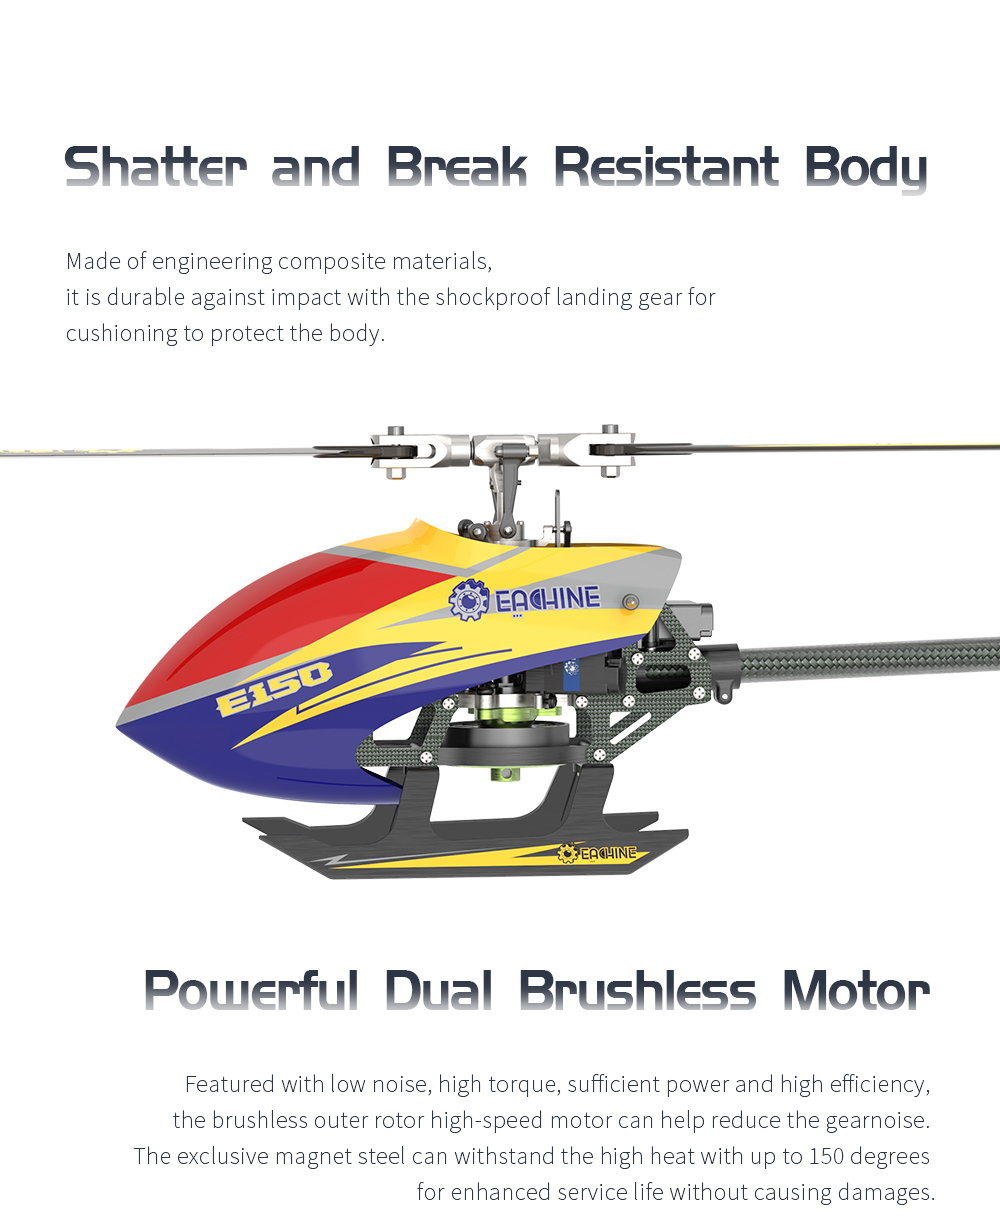 Eachine-E150-24G-6CH-6-Axis-Gyro-3D6G-Dual-Brushless-Direct-Drive-Motor-Flybarless-RC-Helicopter-BNF-1900365-6